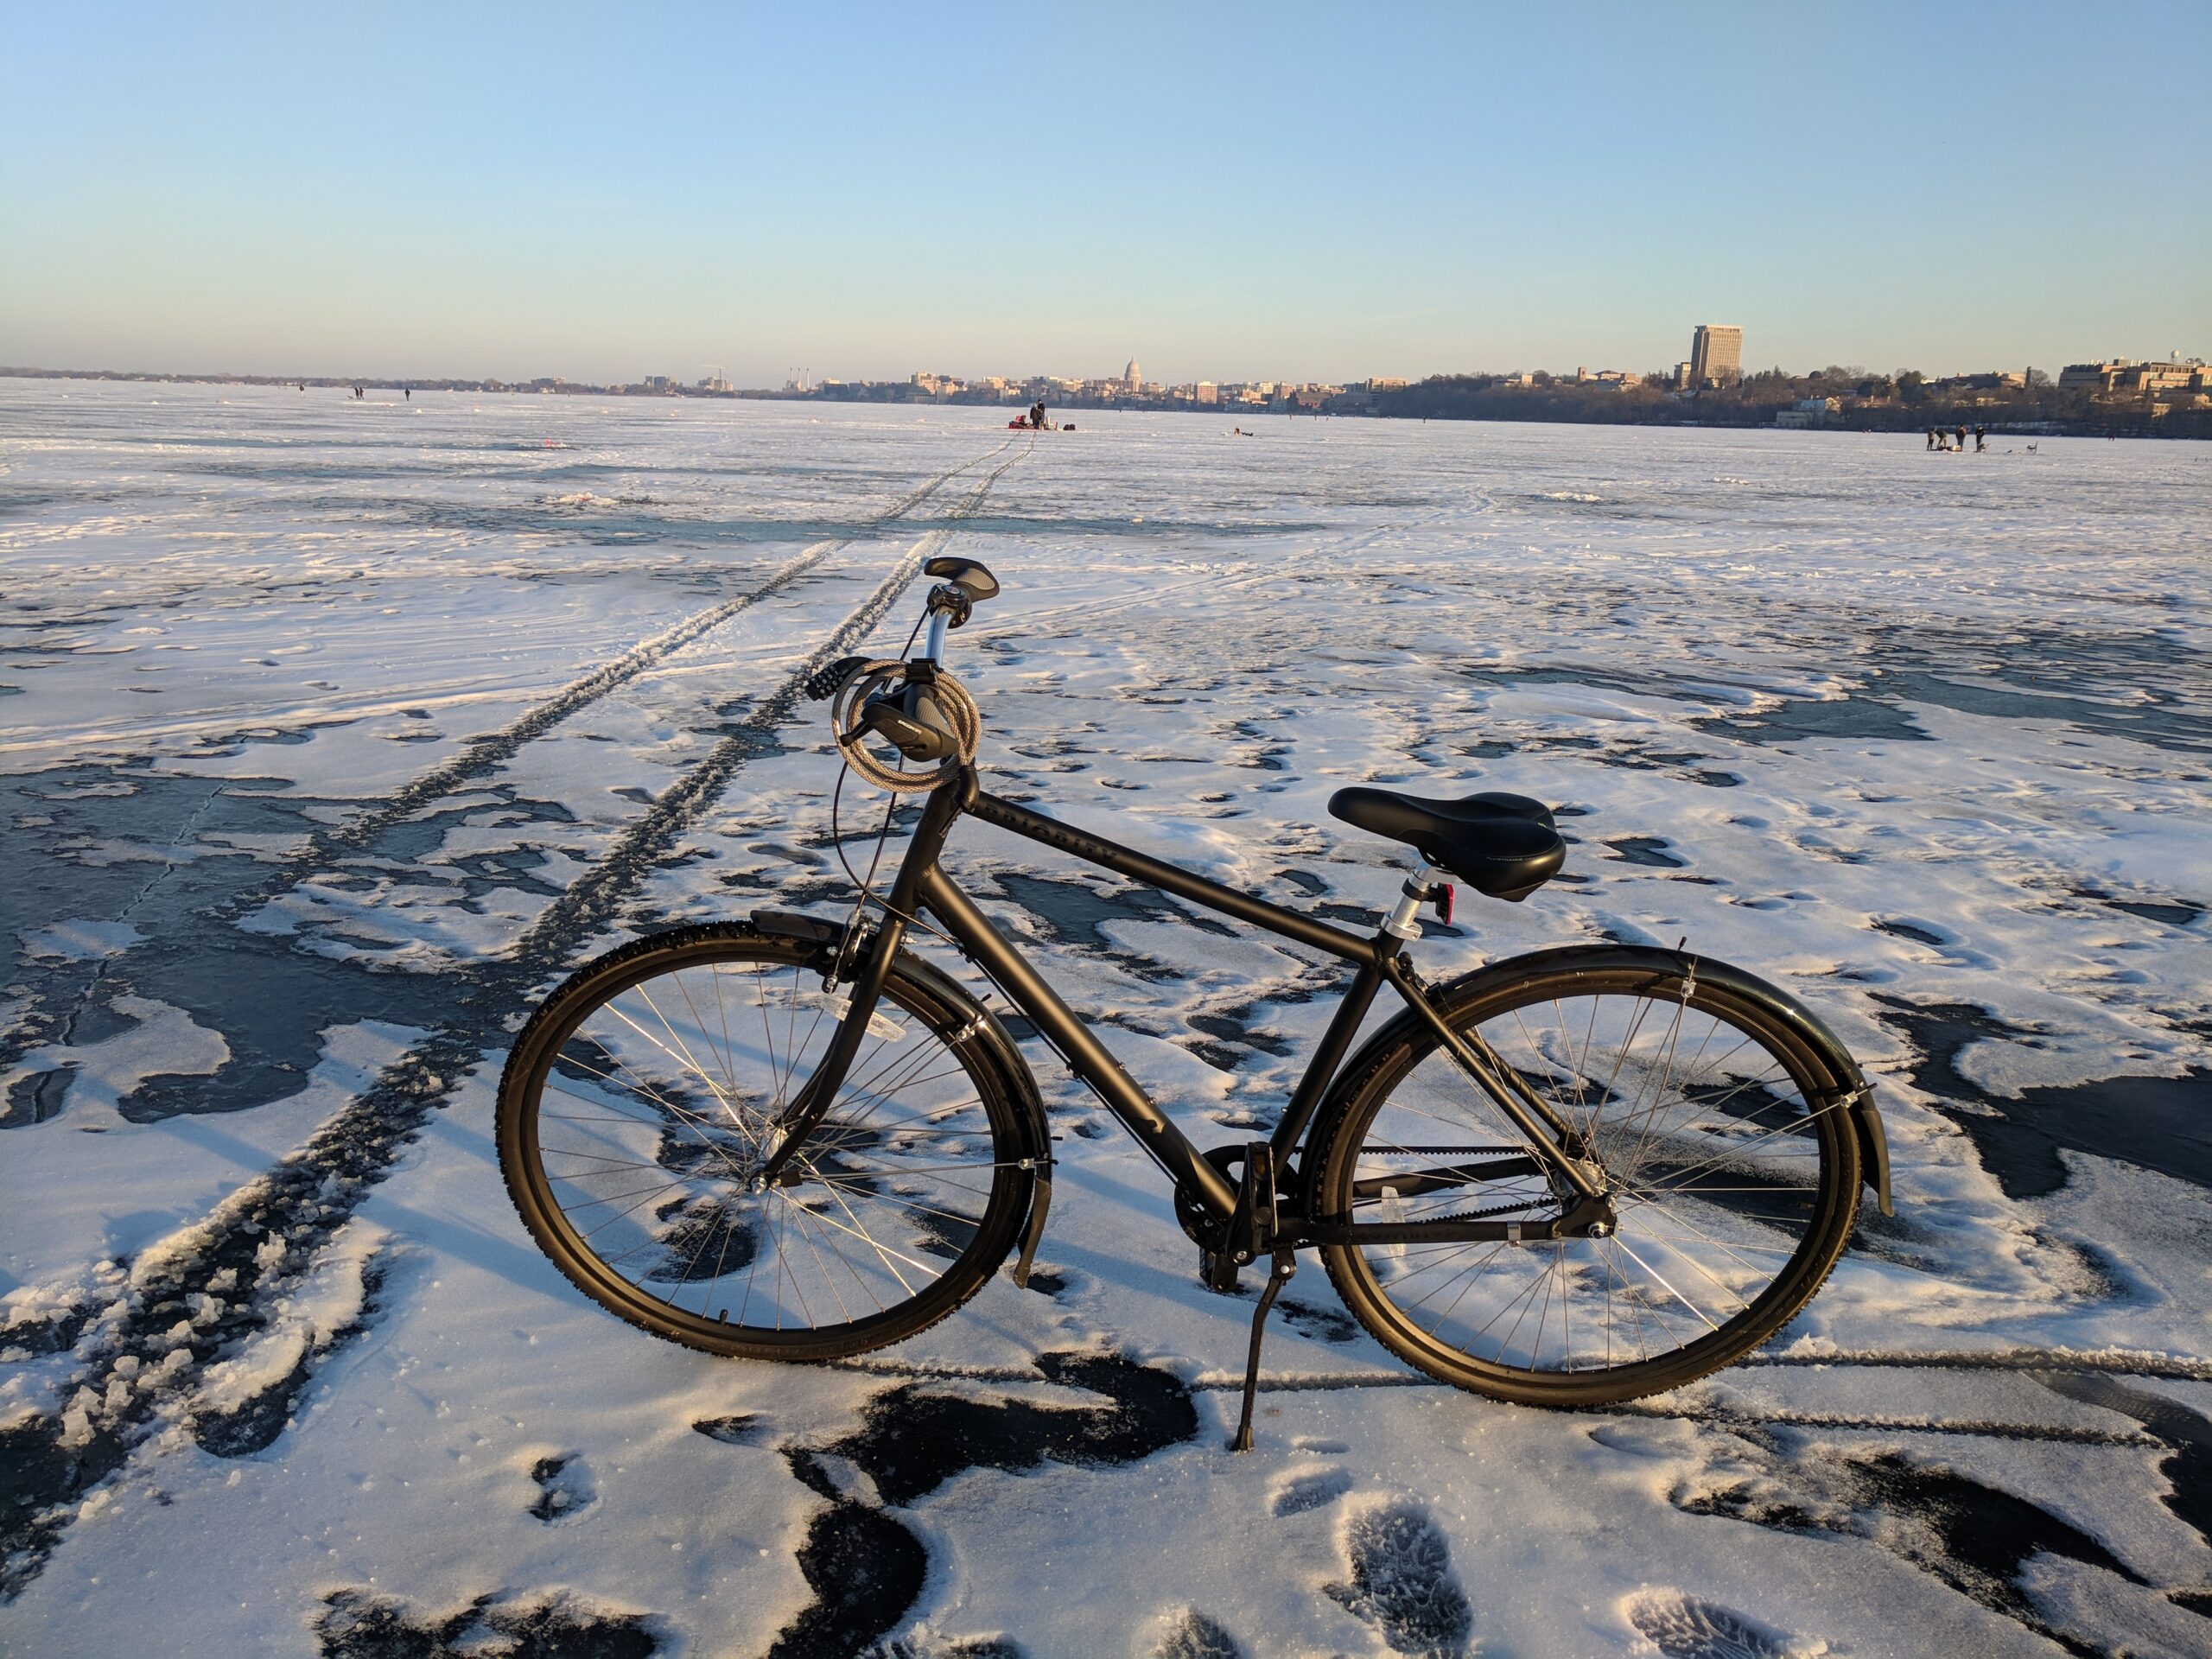 Robbie Webber occasionally ventures out onto Lake Mendota with this bike.